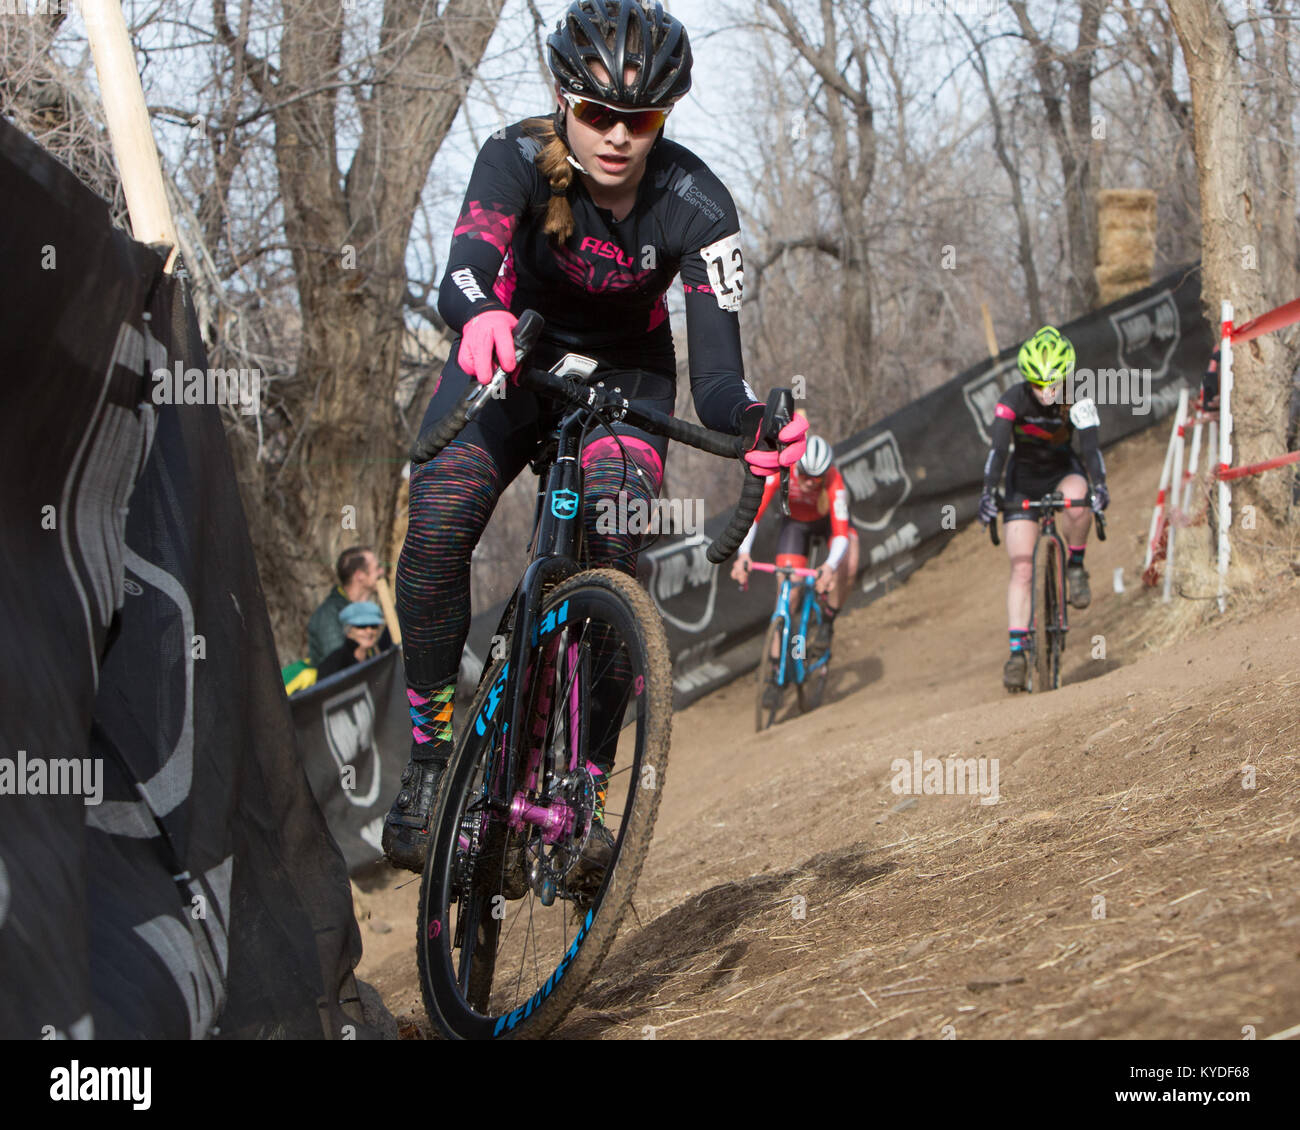 Reno, Nevada, USA. 14th Jan, 2018. KATHRYN MCDICKEN, team ASU, hugs the fence with challengers on her wheel during the Women's U23 USA Cycling Cyclocross National Championships at Rancho San Rafael Park in Reno, Nevada, on Sunday, January 14, 2018. Credit: Tracy Barbutes/ZUMA Wire/Alamy Live News Stock Photo